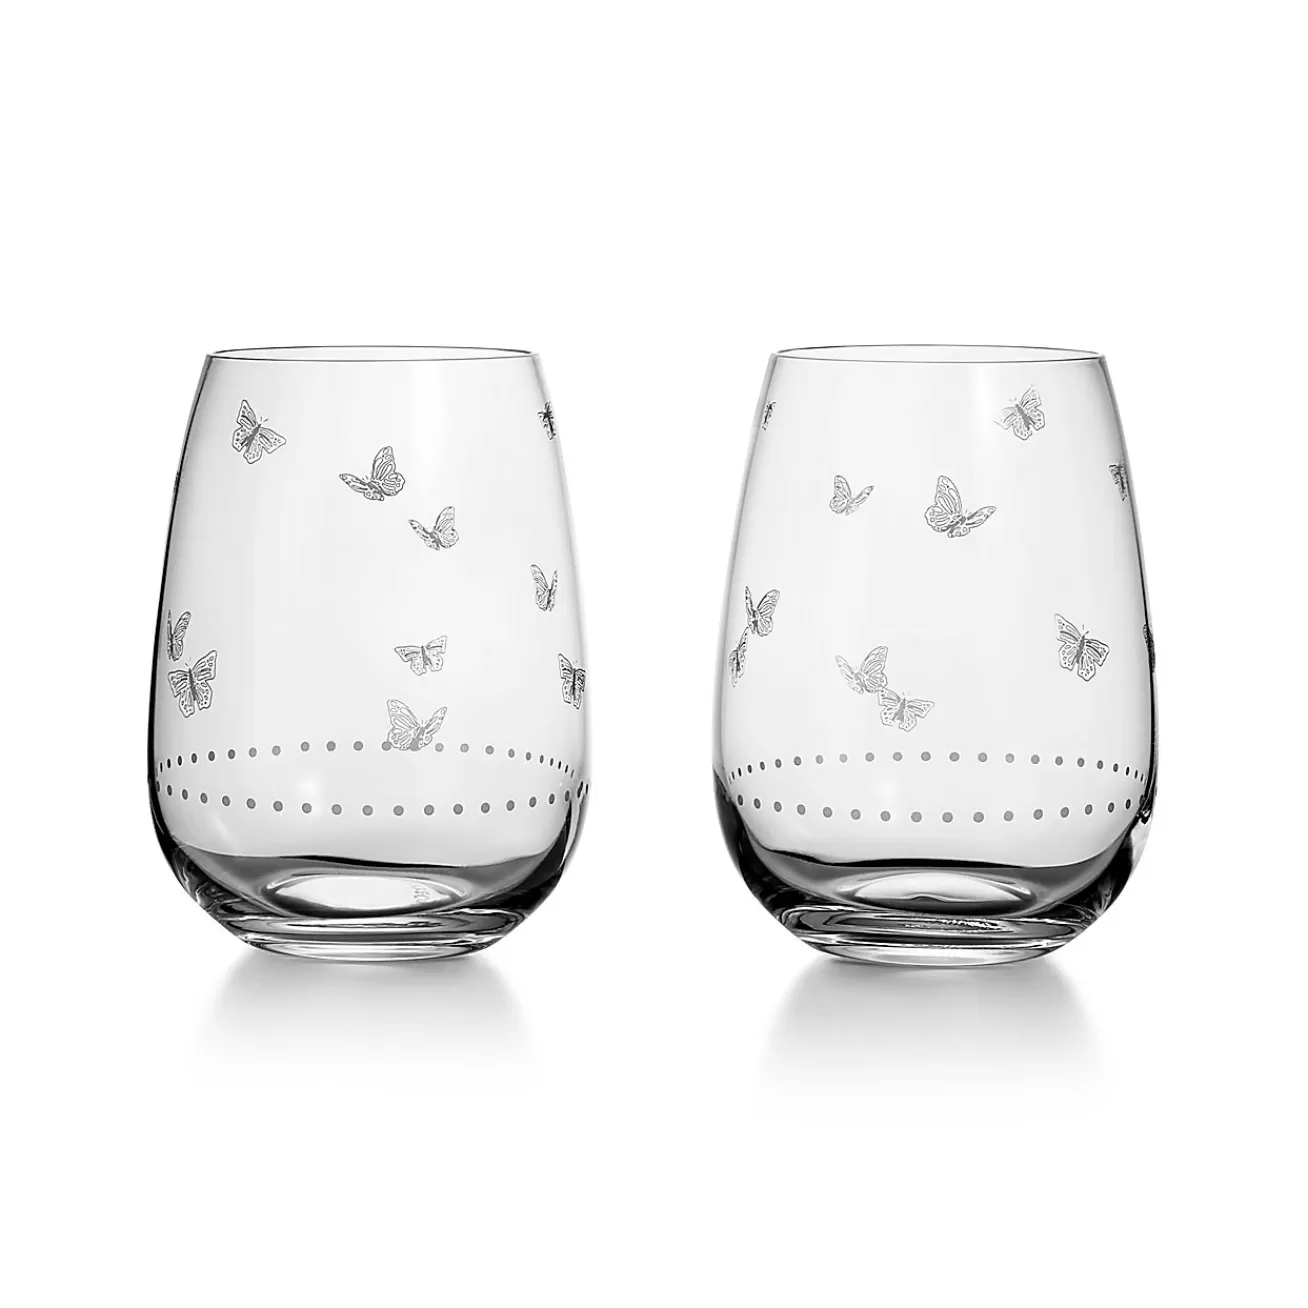 Tiffany & Co. Tiffany Jardin Stemless White Wine Glasses in Etched Glass, Set of Two | ^ Glassware & Barware | Bar & Drinkware